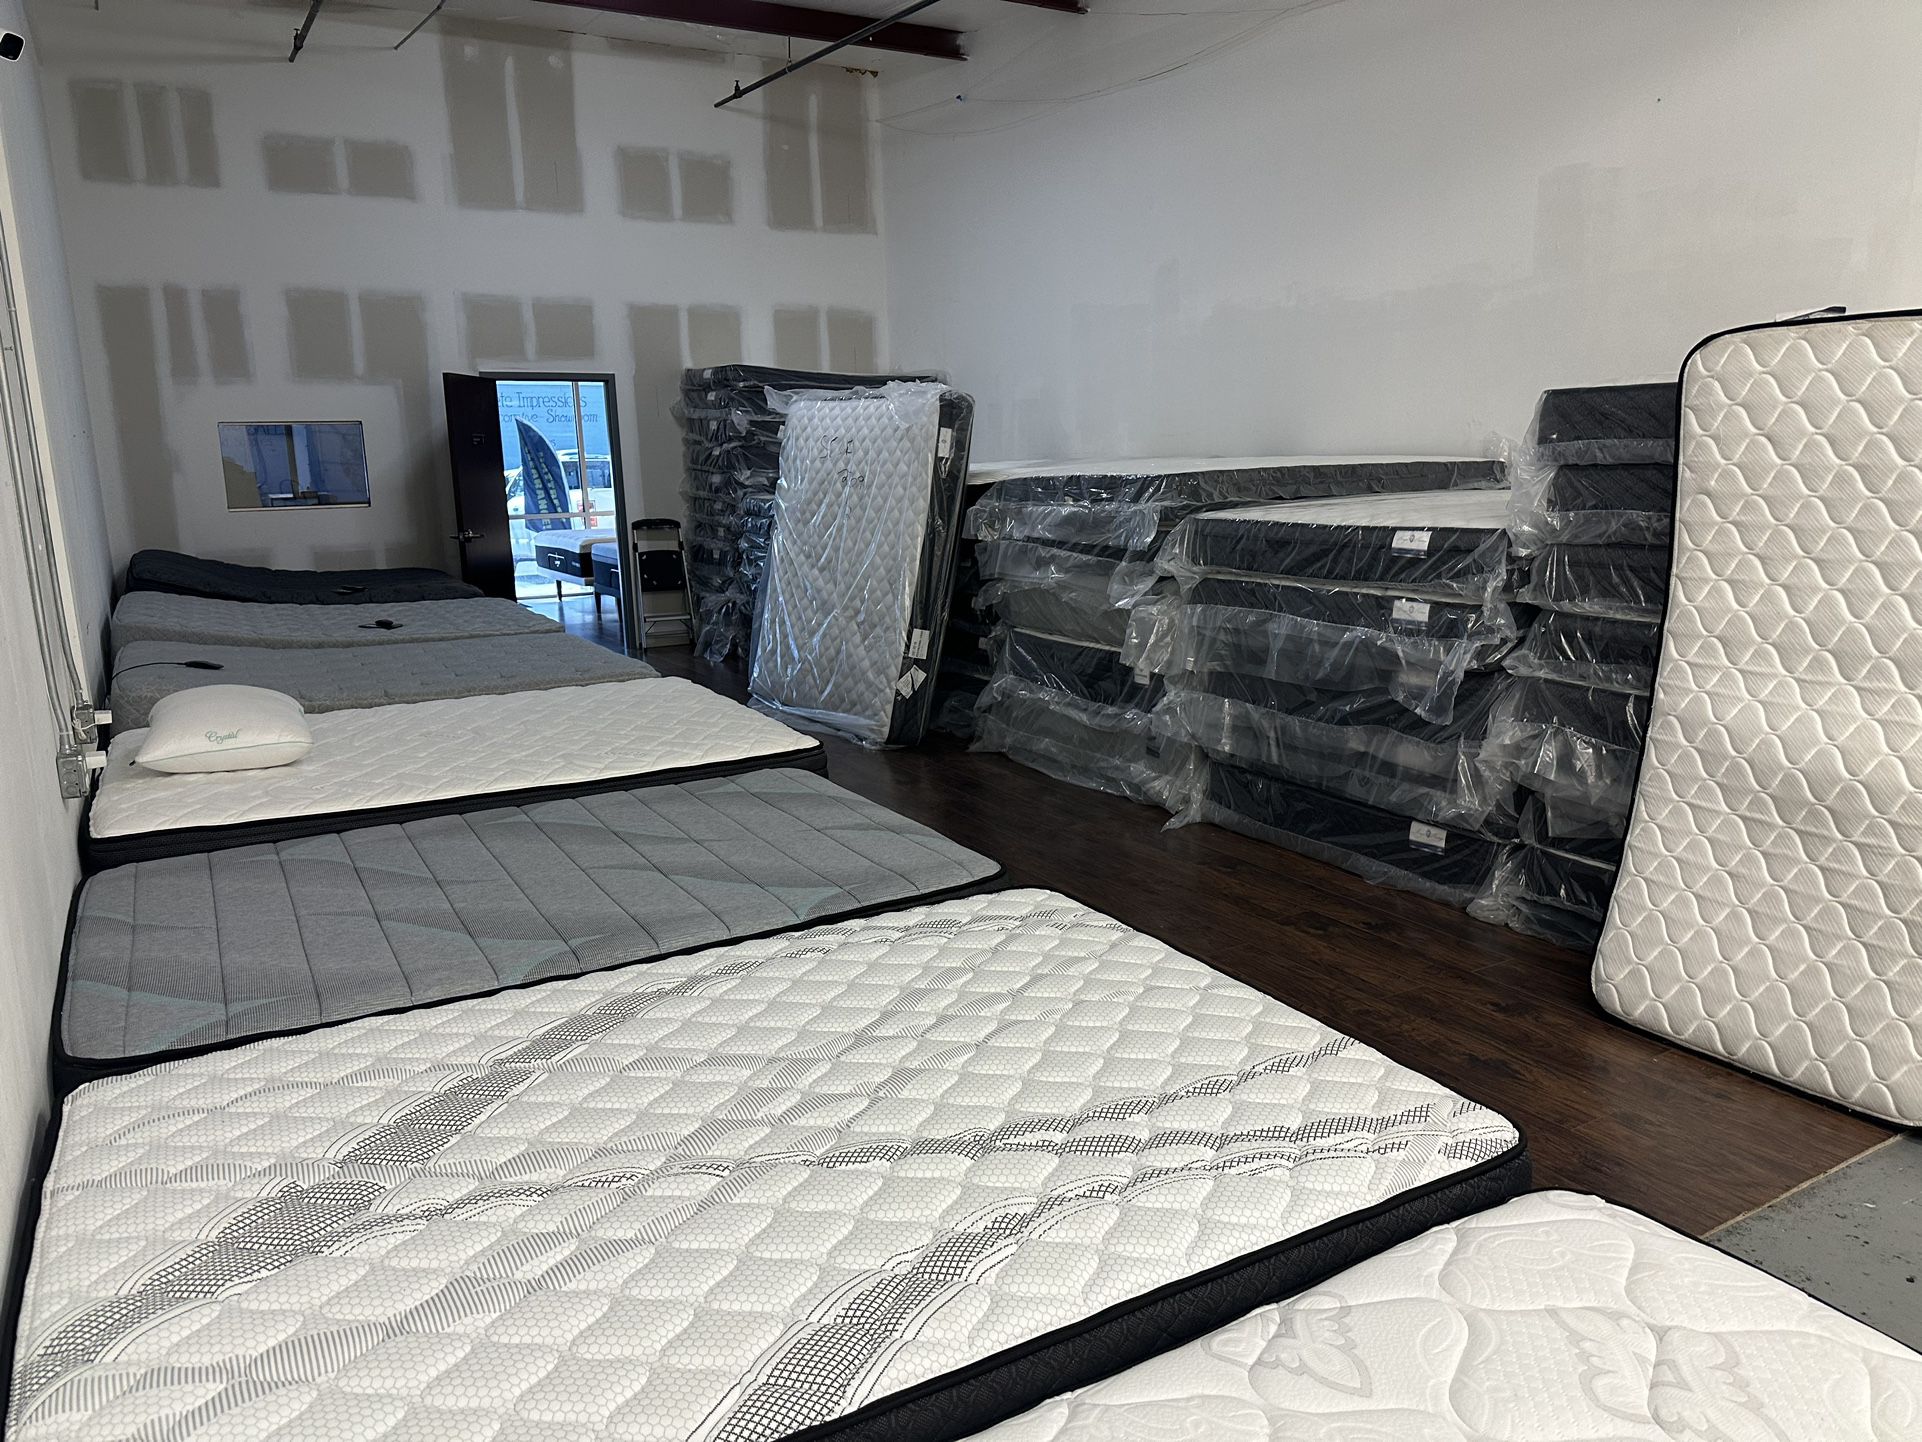 I Need to Clear Out All of These Mattresses. New Truckloads Are Coming In!